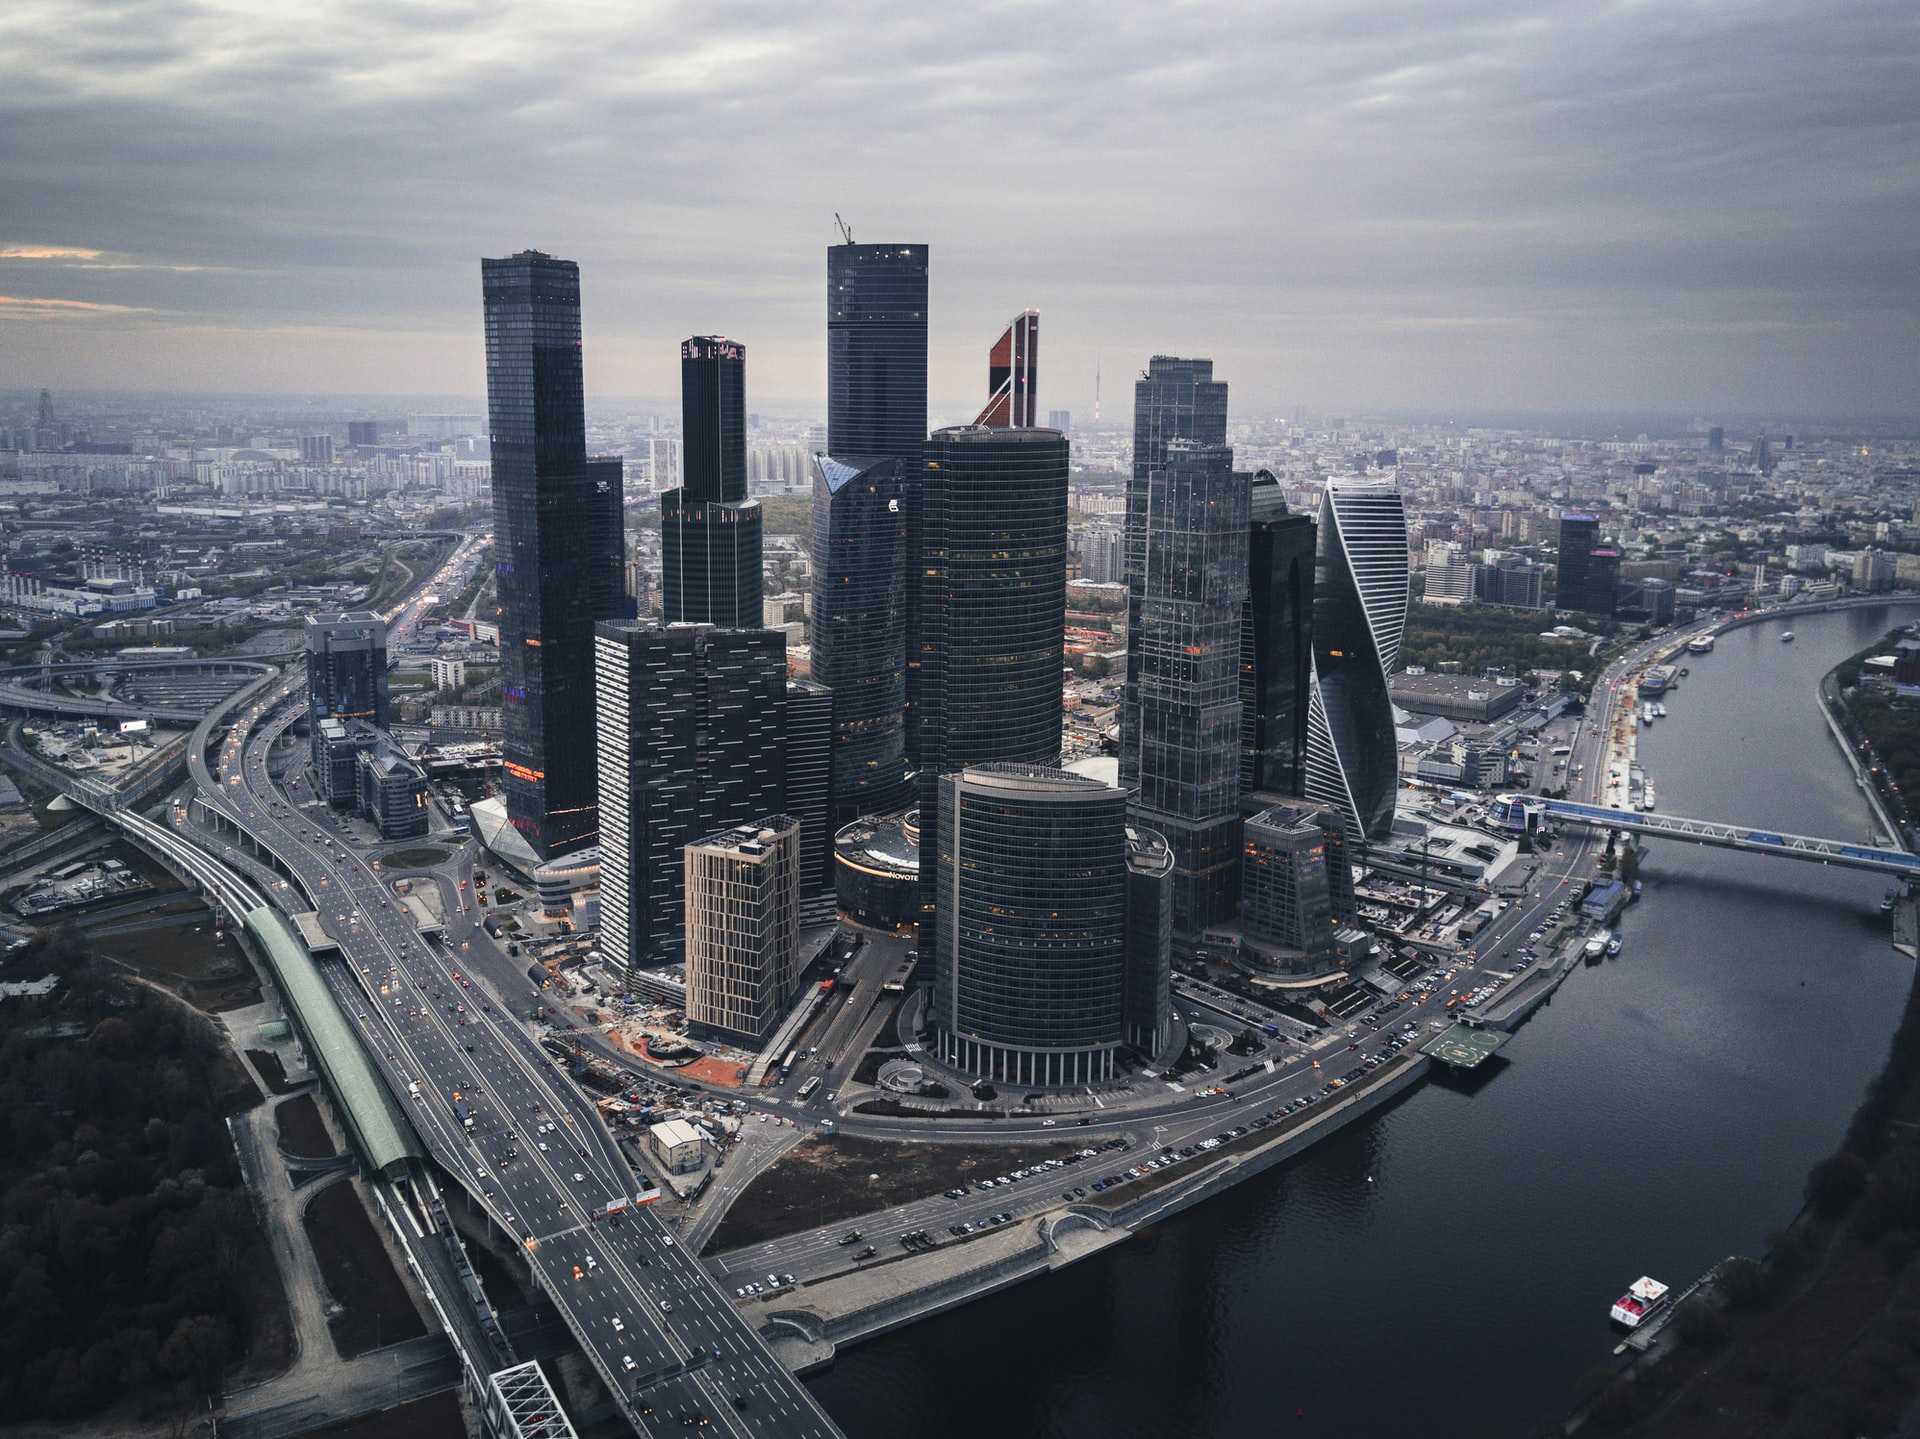 Moscow's financial district.